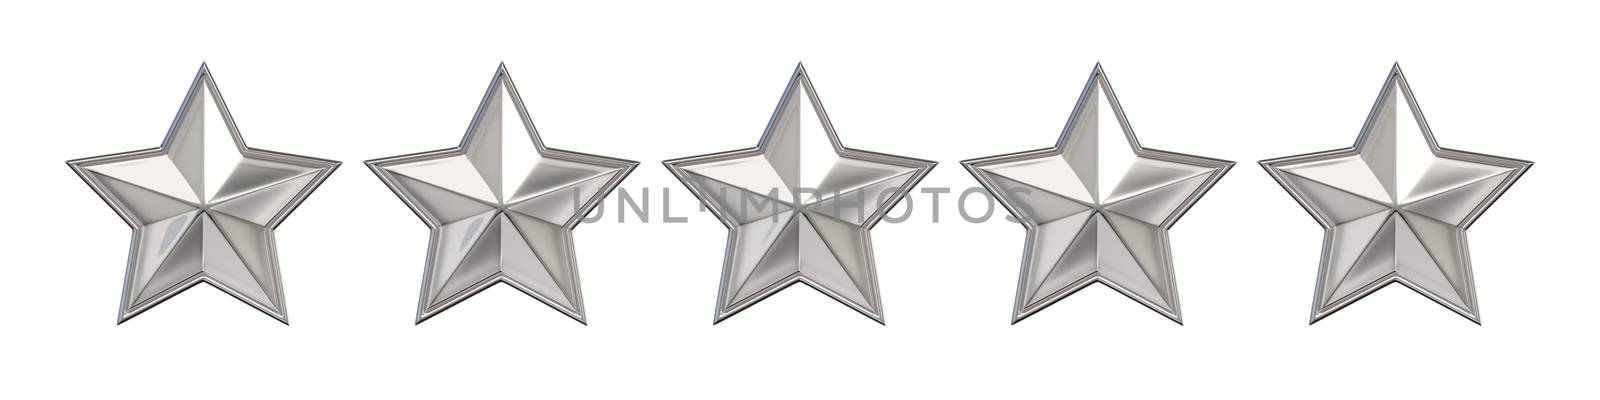 Voting concept. Rating without golden star. 3D render illustration isolated on white background